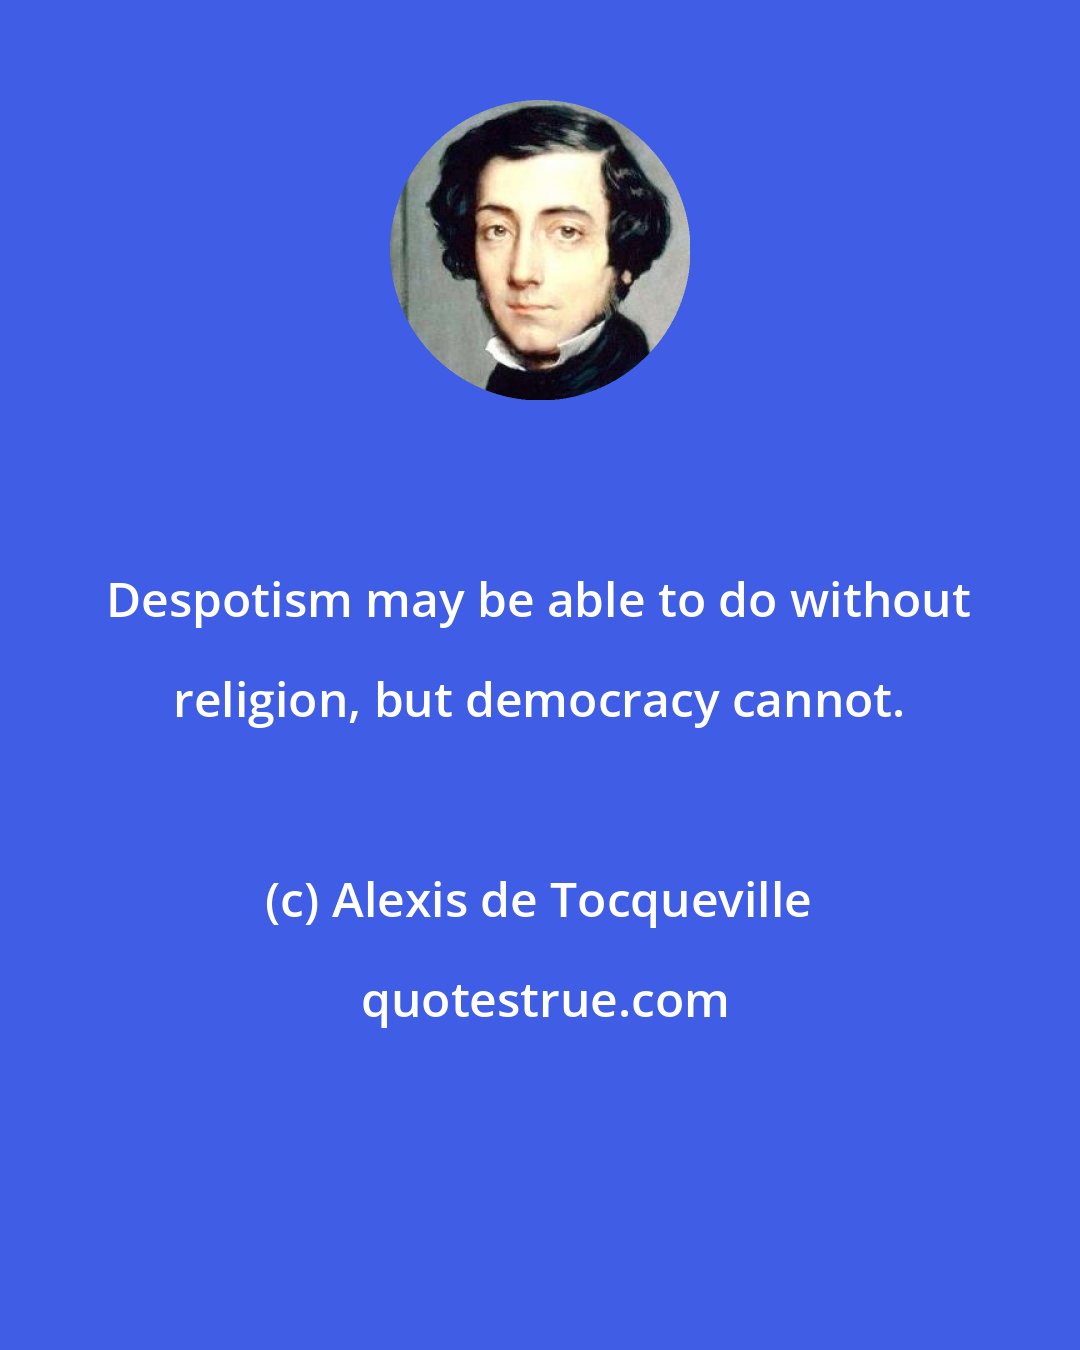 Alexis de Tocqueville: Despotism may be able to do without religion, but democracy cannot.